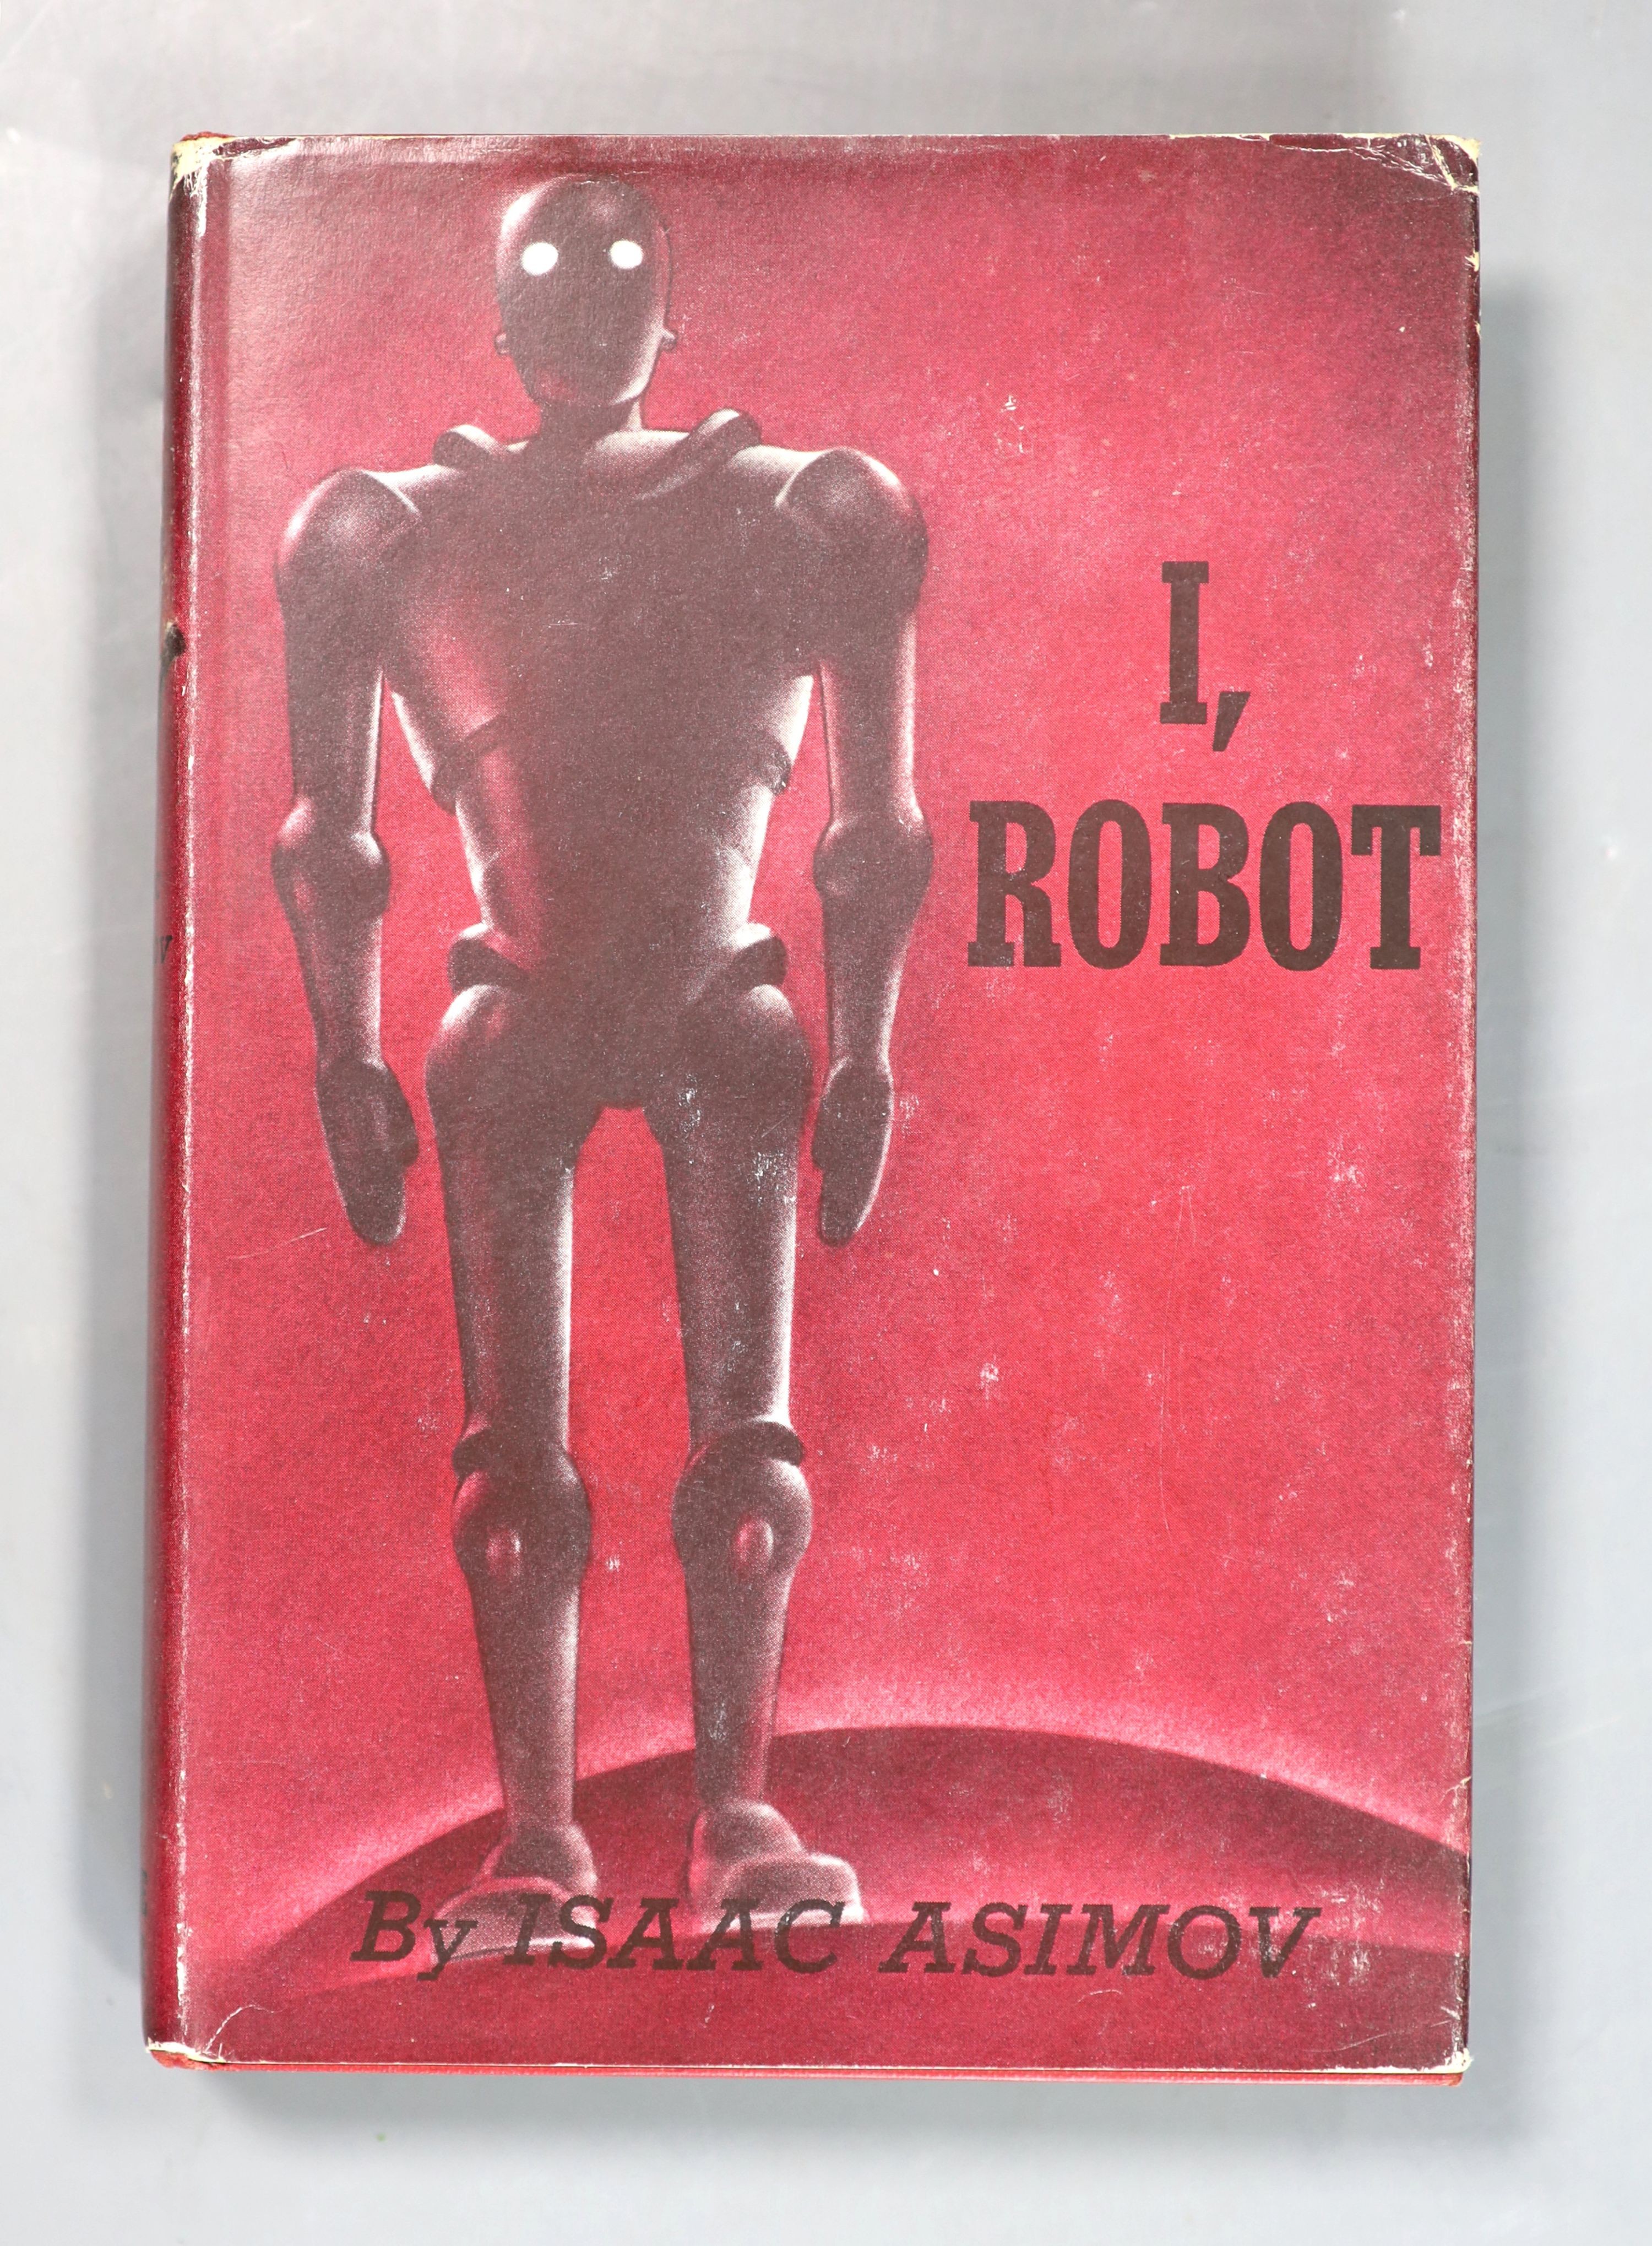 Asimov, Isaac - I, Robot, 1st edition, 1st printing, 8vo, original red cloth, slight stains to fly leaves, with unclipped d/j, designed by Edd Cartier, with some small nicks and short tears, Gnome Press, New York, 1950